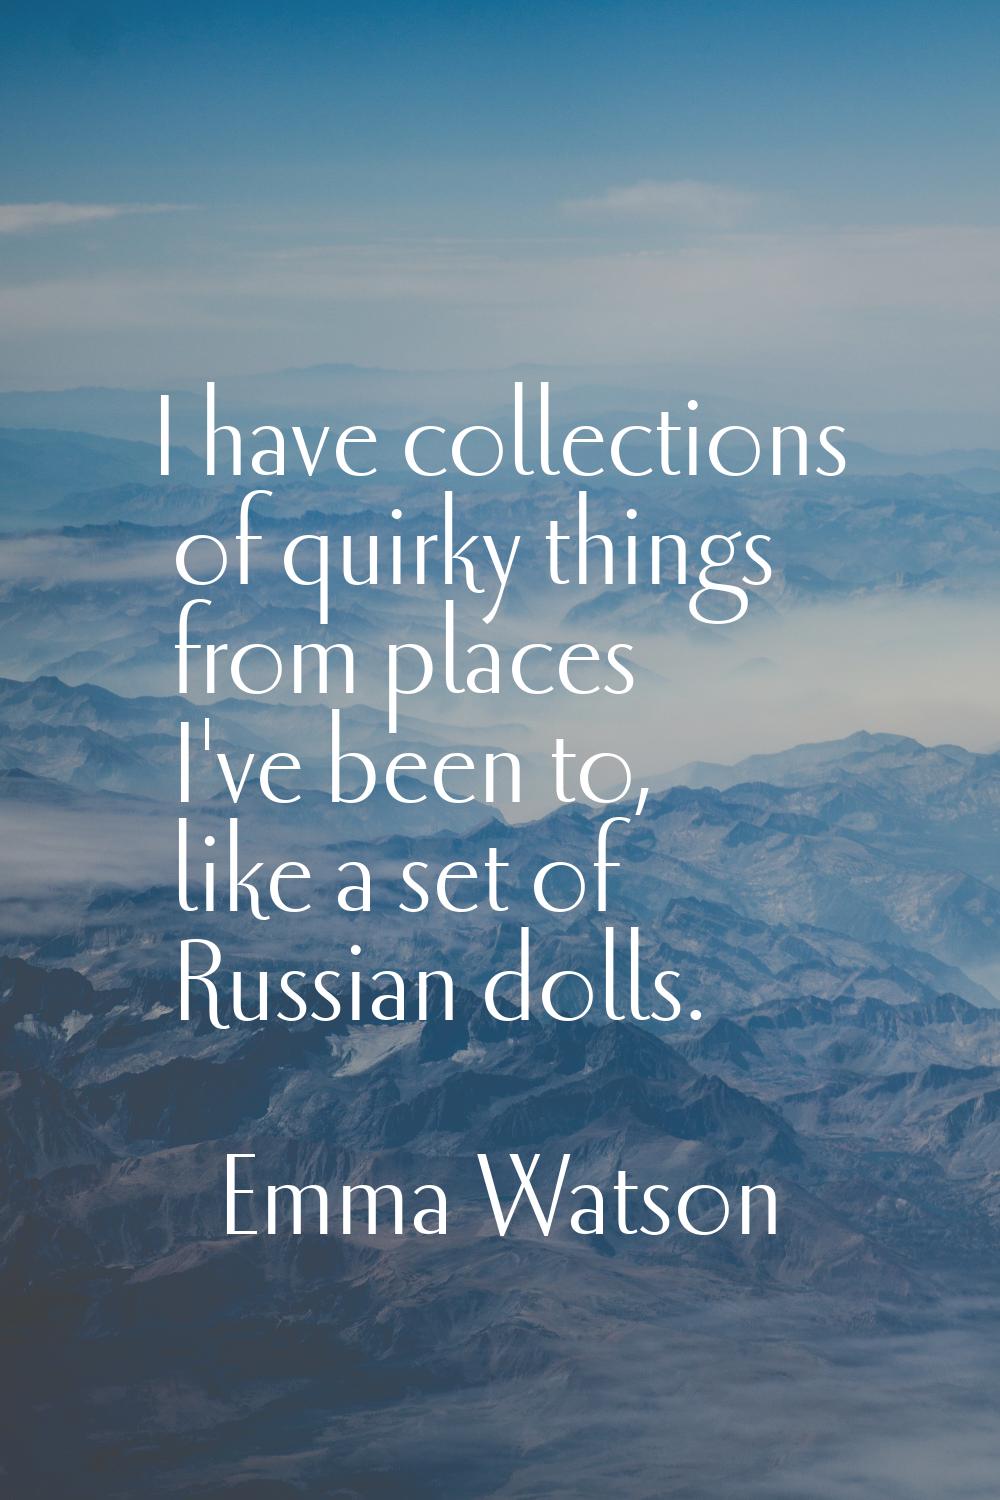 I have collections of quirky things from places I've been to, like a set of Russian dolls.